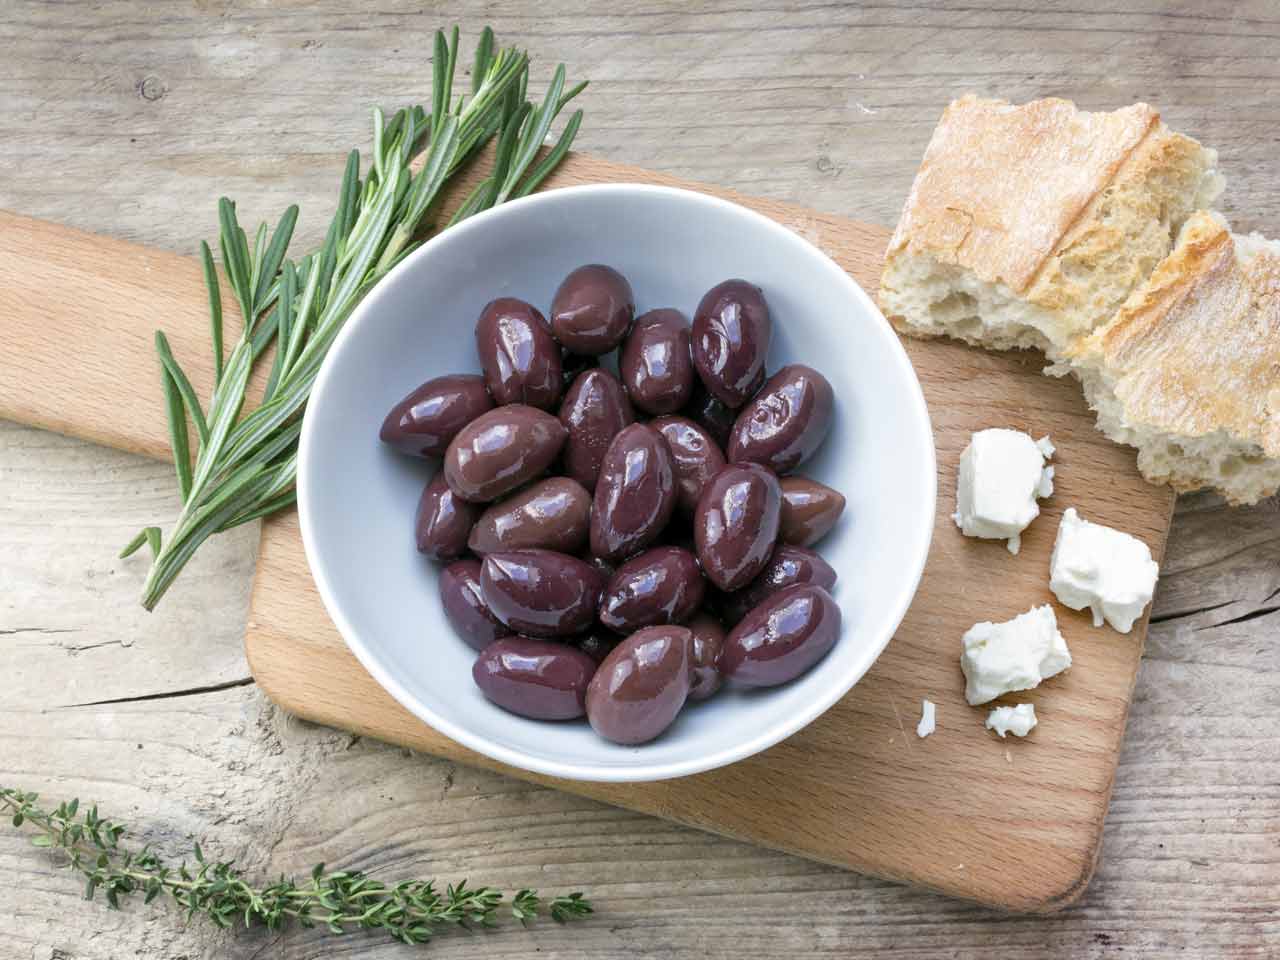 Salty foods such as olives and cheese